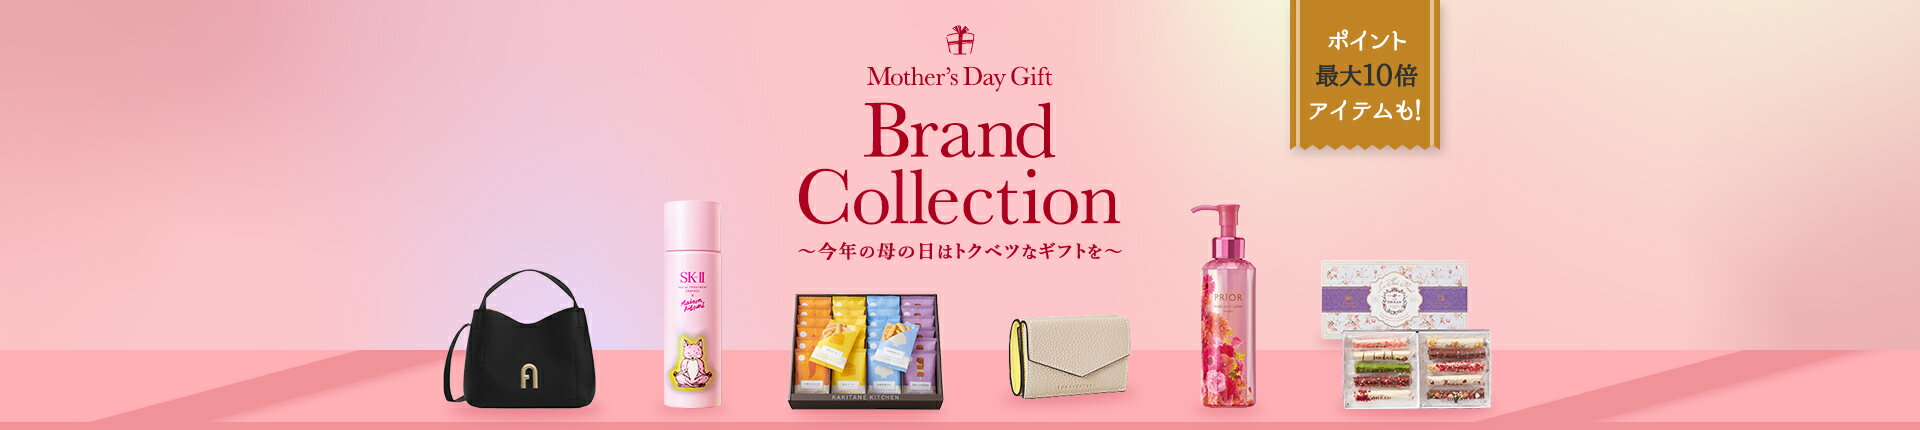 Mother's Gift Brand Collection